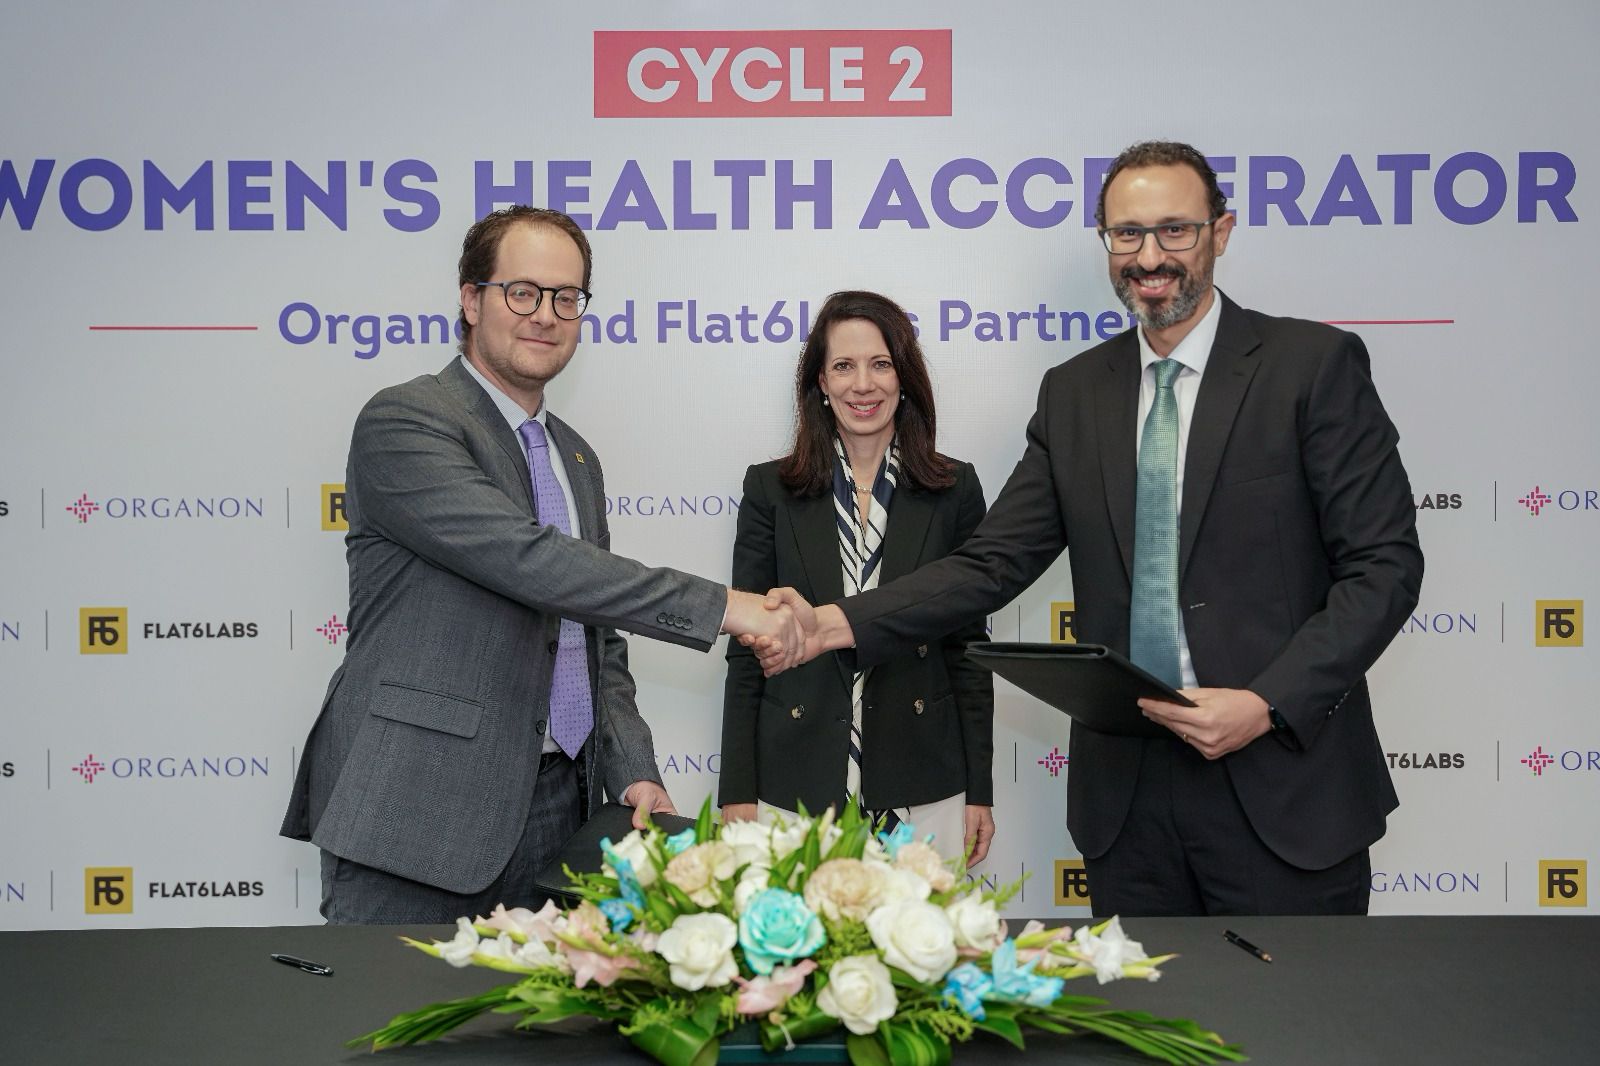 Organon And Flat6labs Announce Second Cycle Of Womens Health